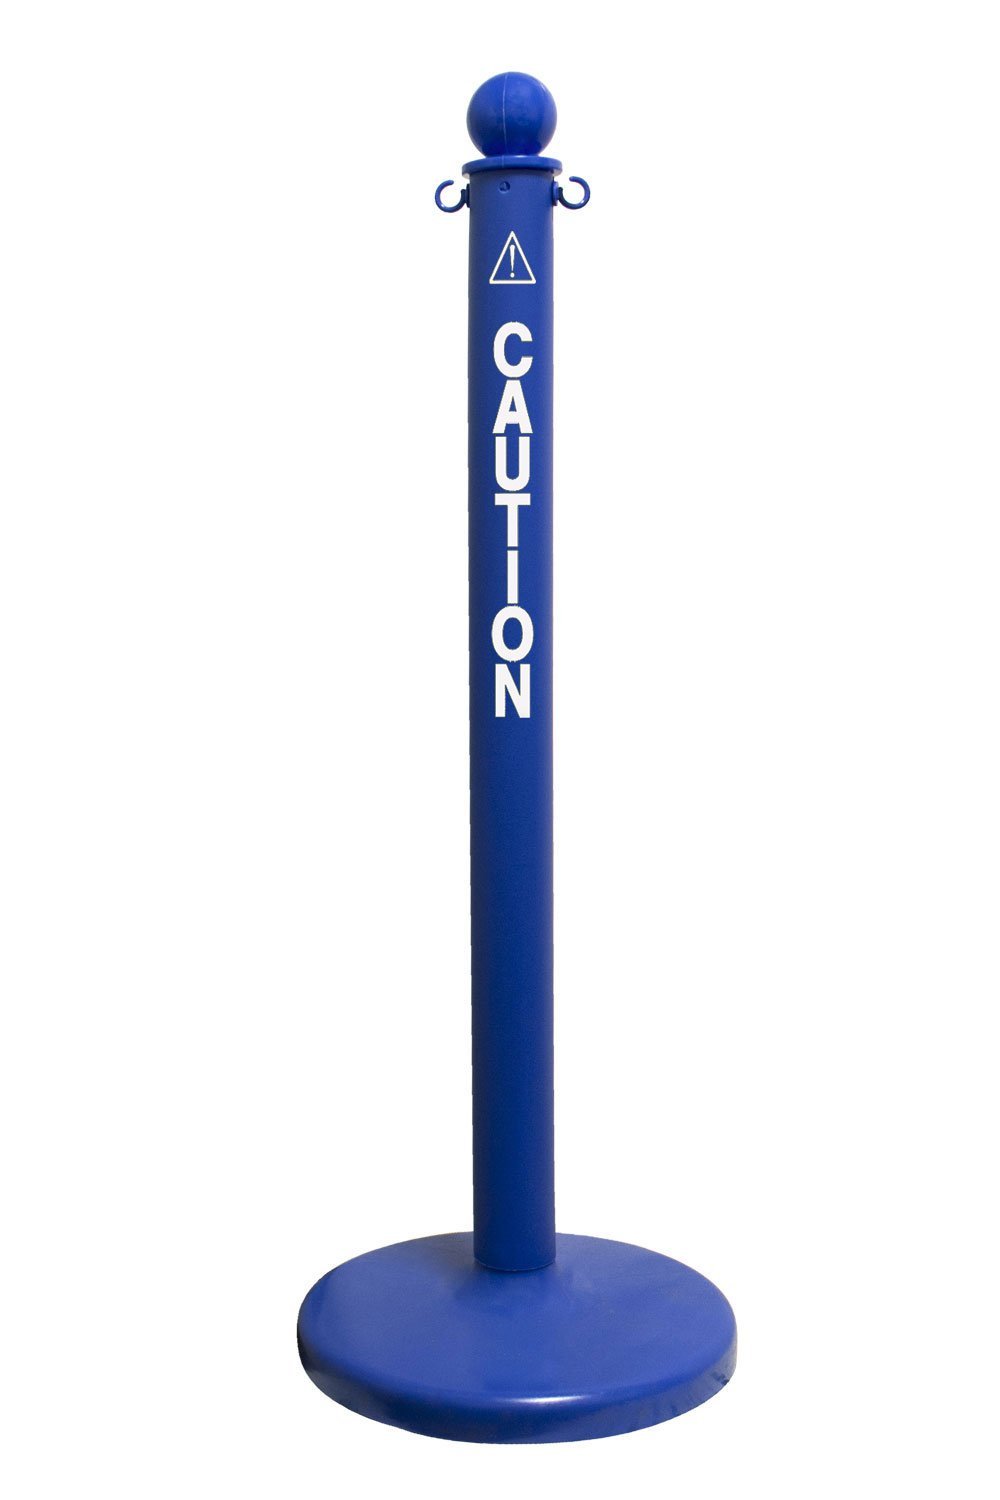 2.5" Diameter Safety Stanchion with Preprinted Label - The Crowd Controller